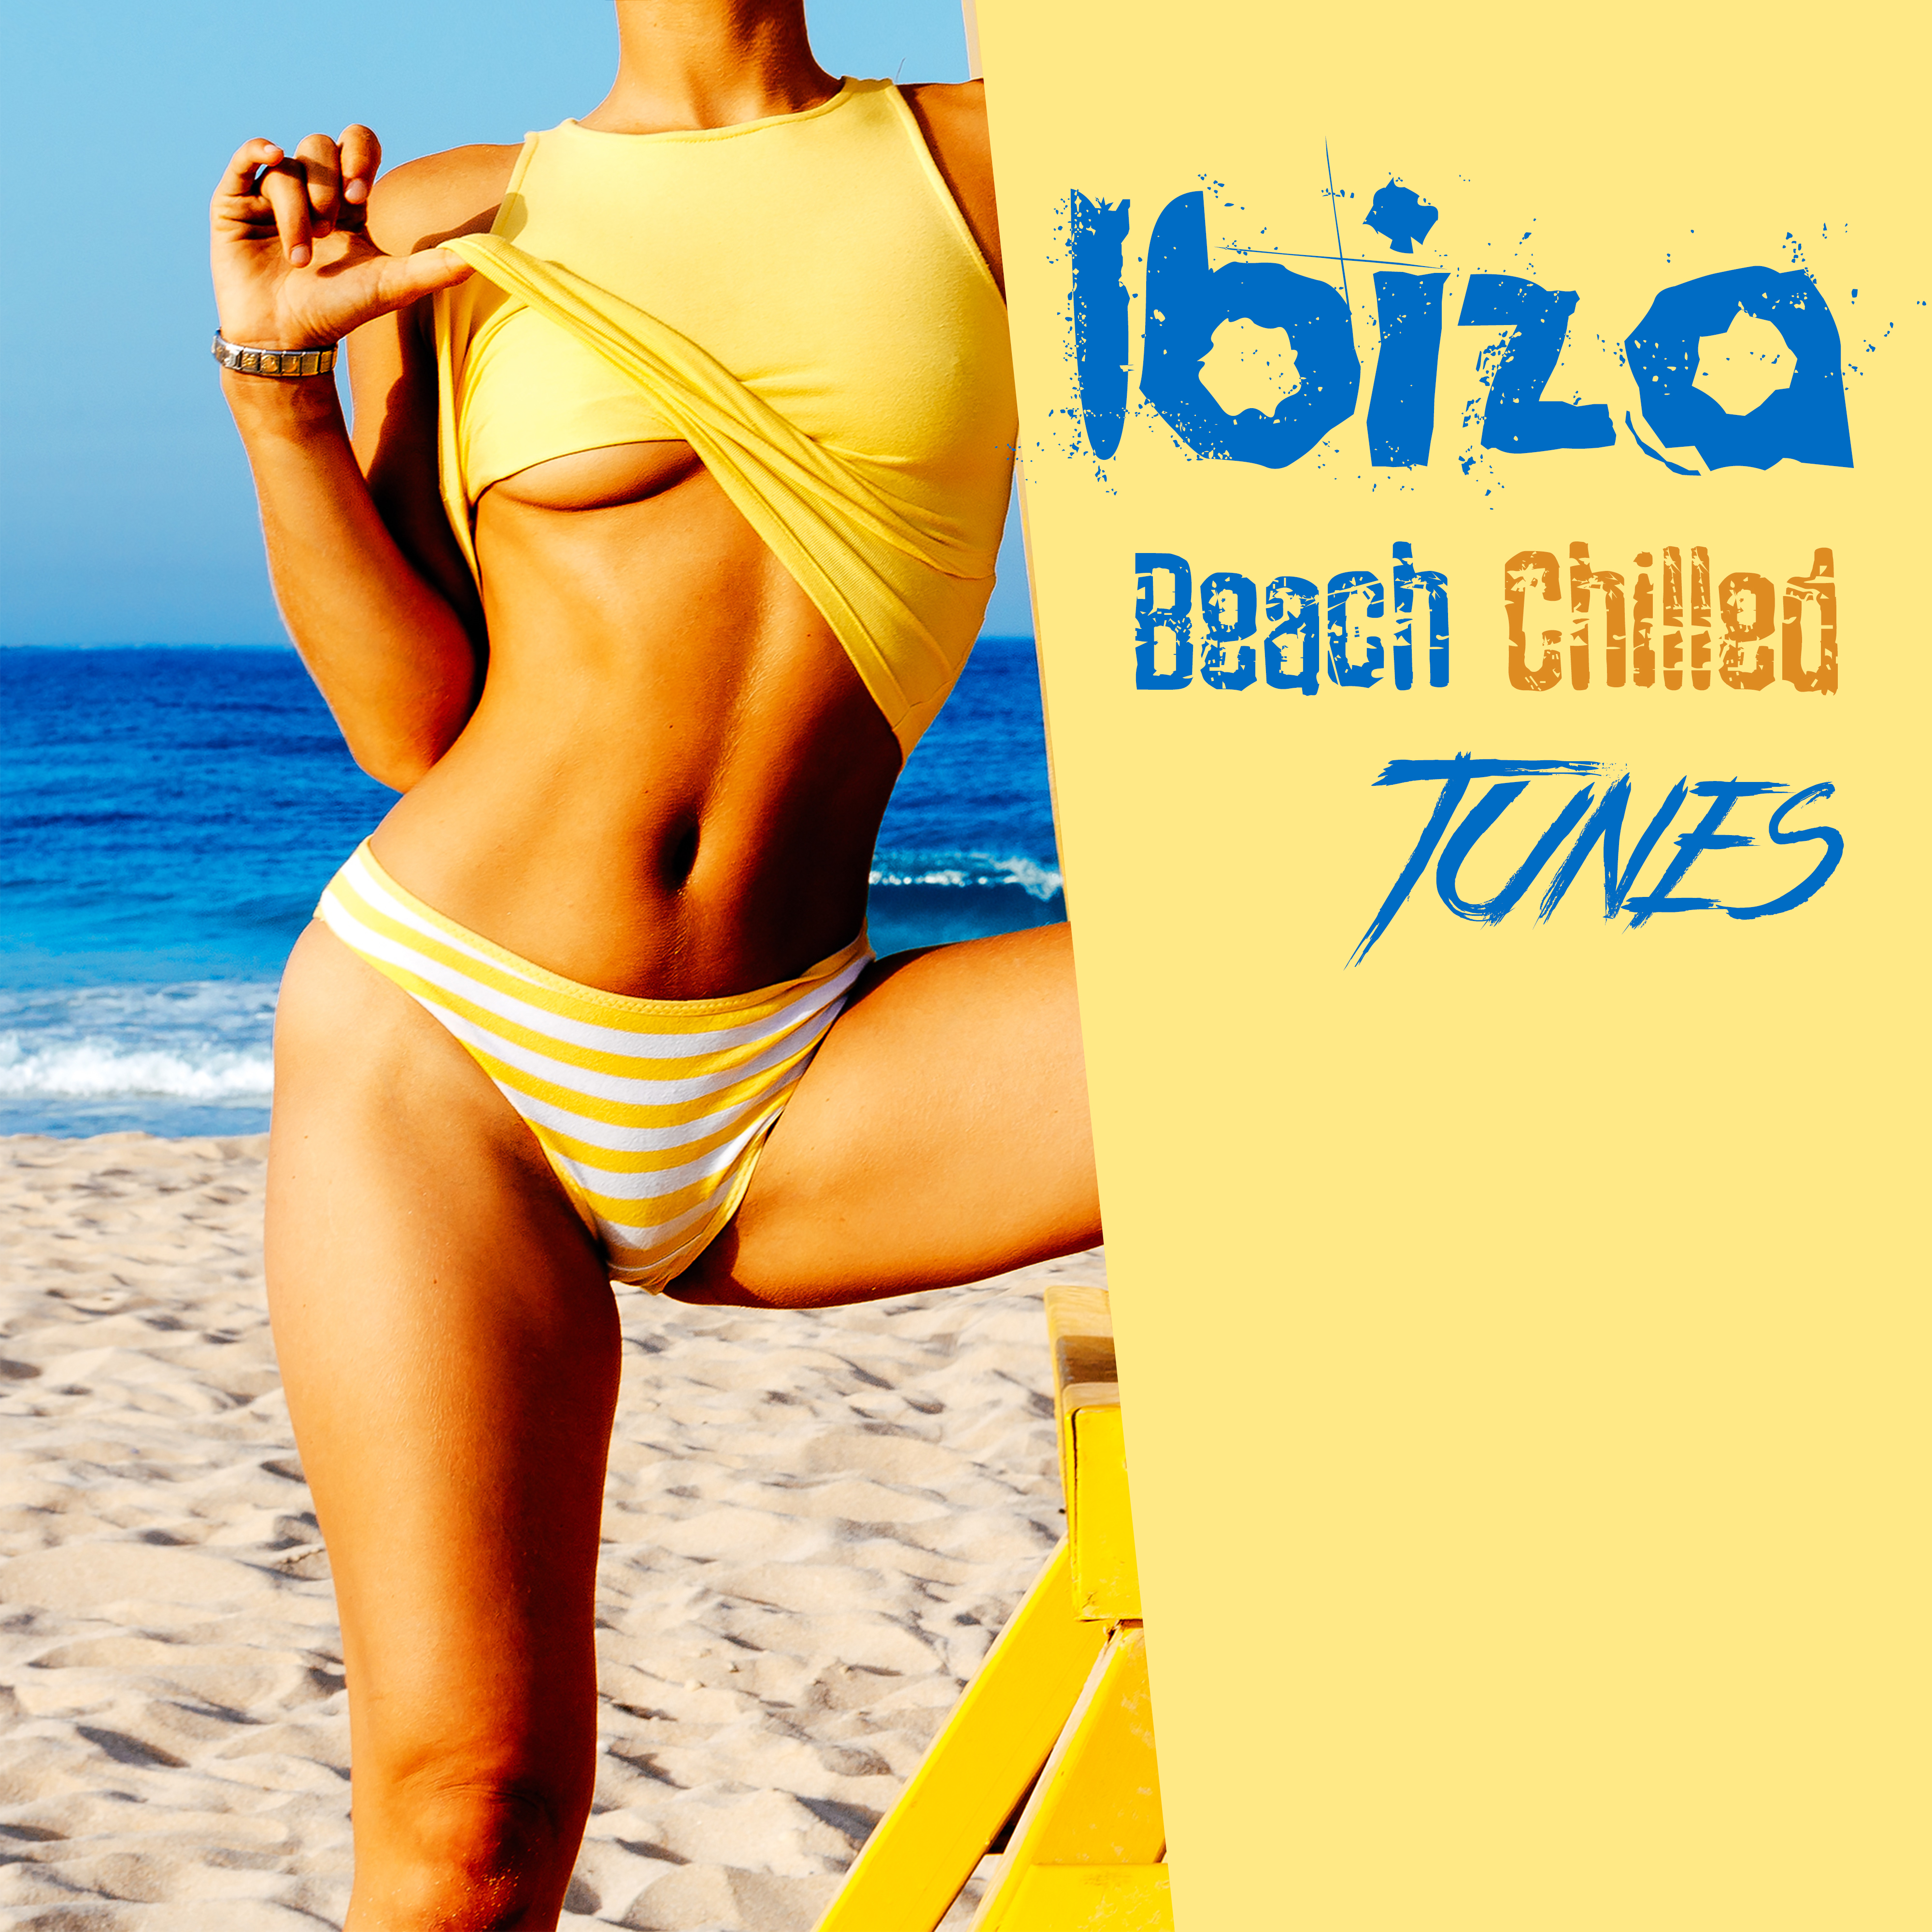 Ibiza Beach Chilled Tunes – Chill Out 2018